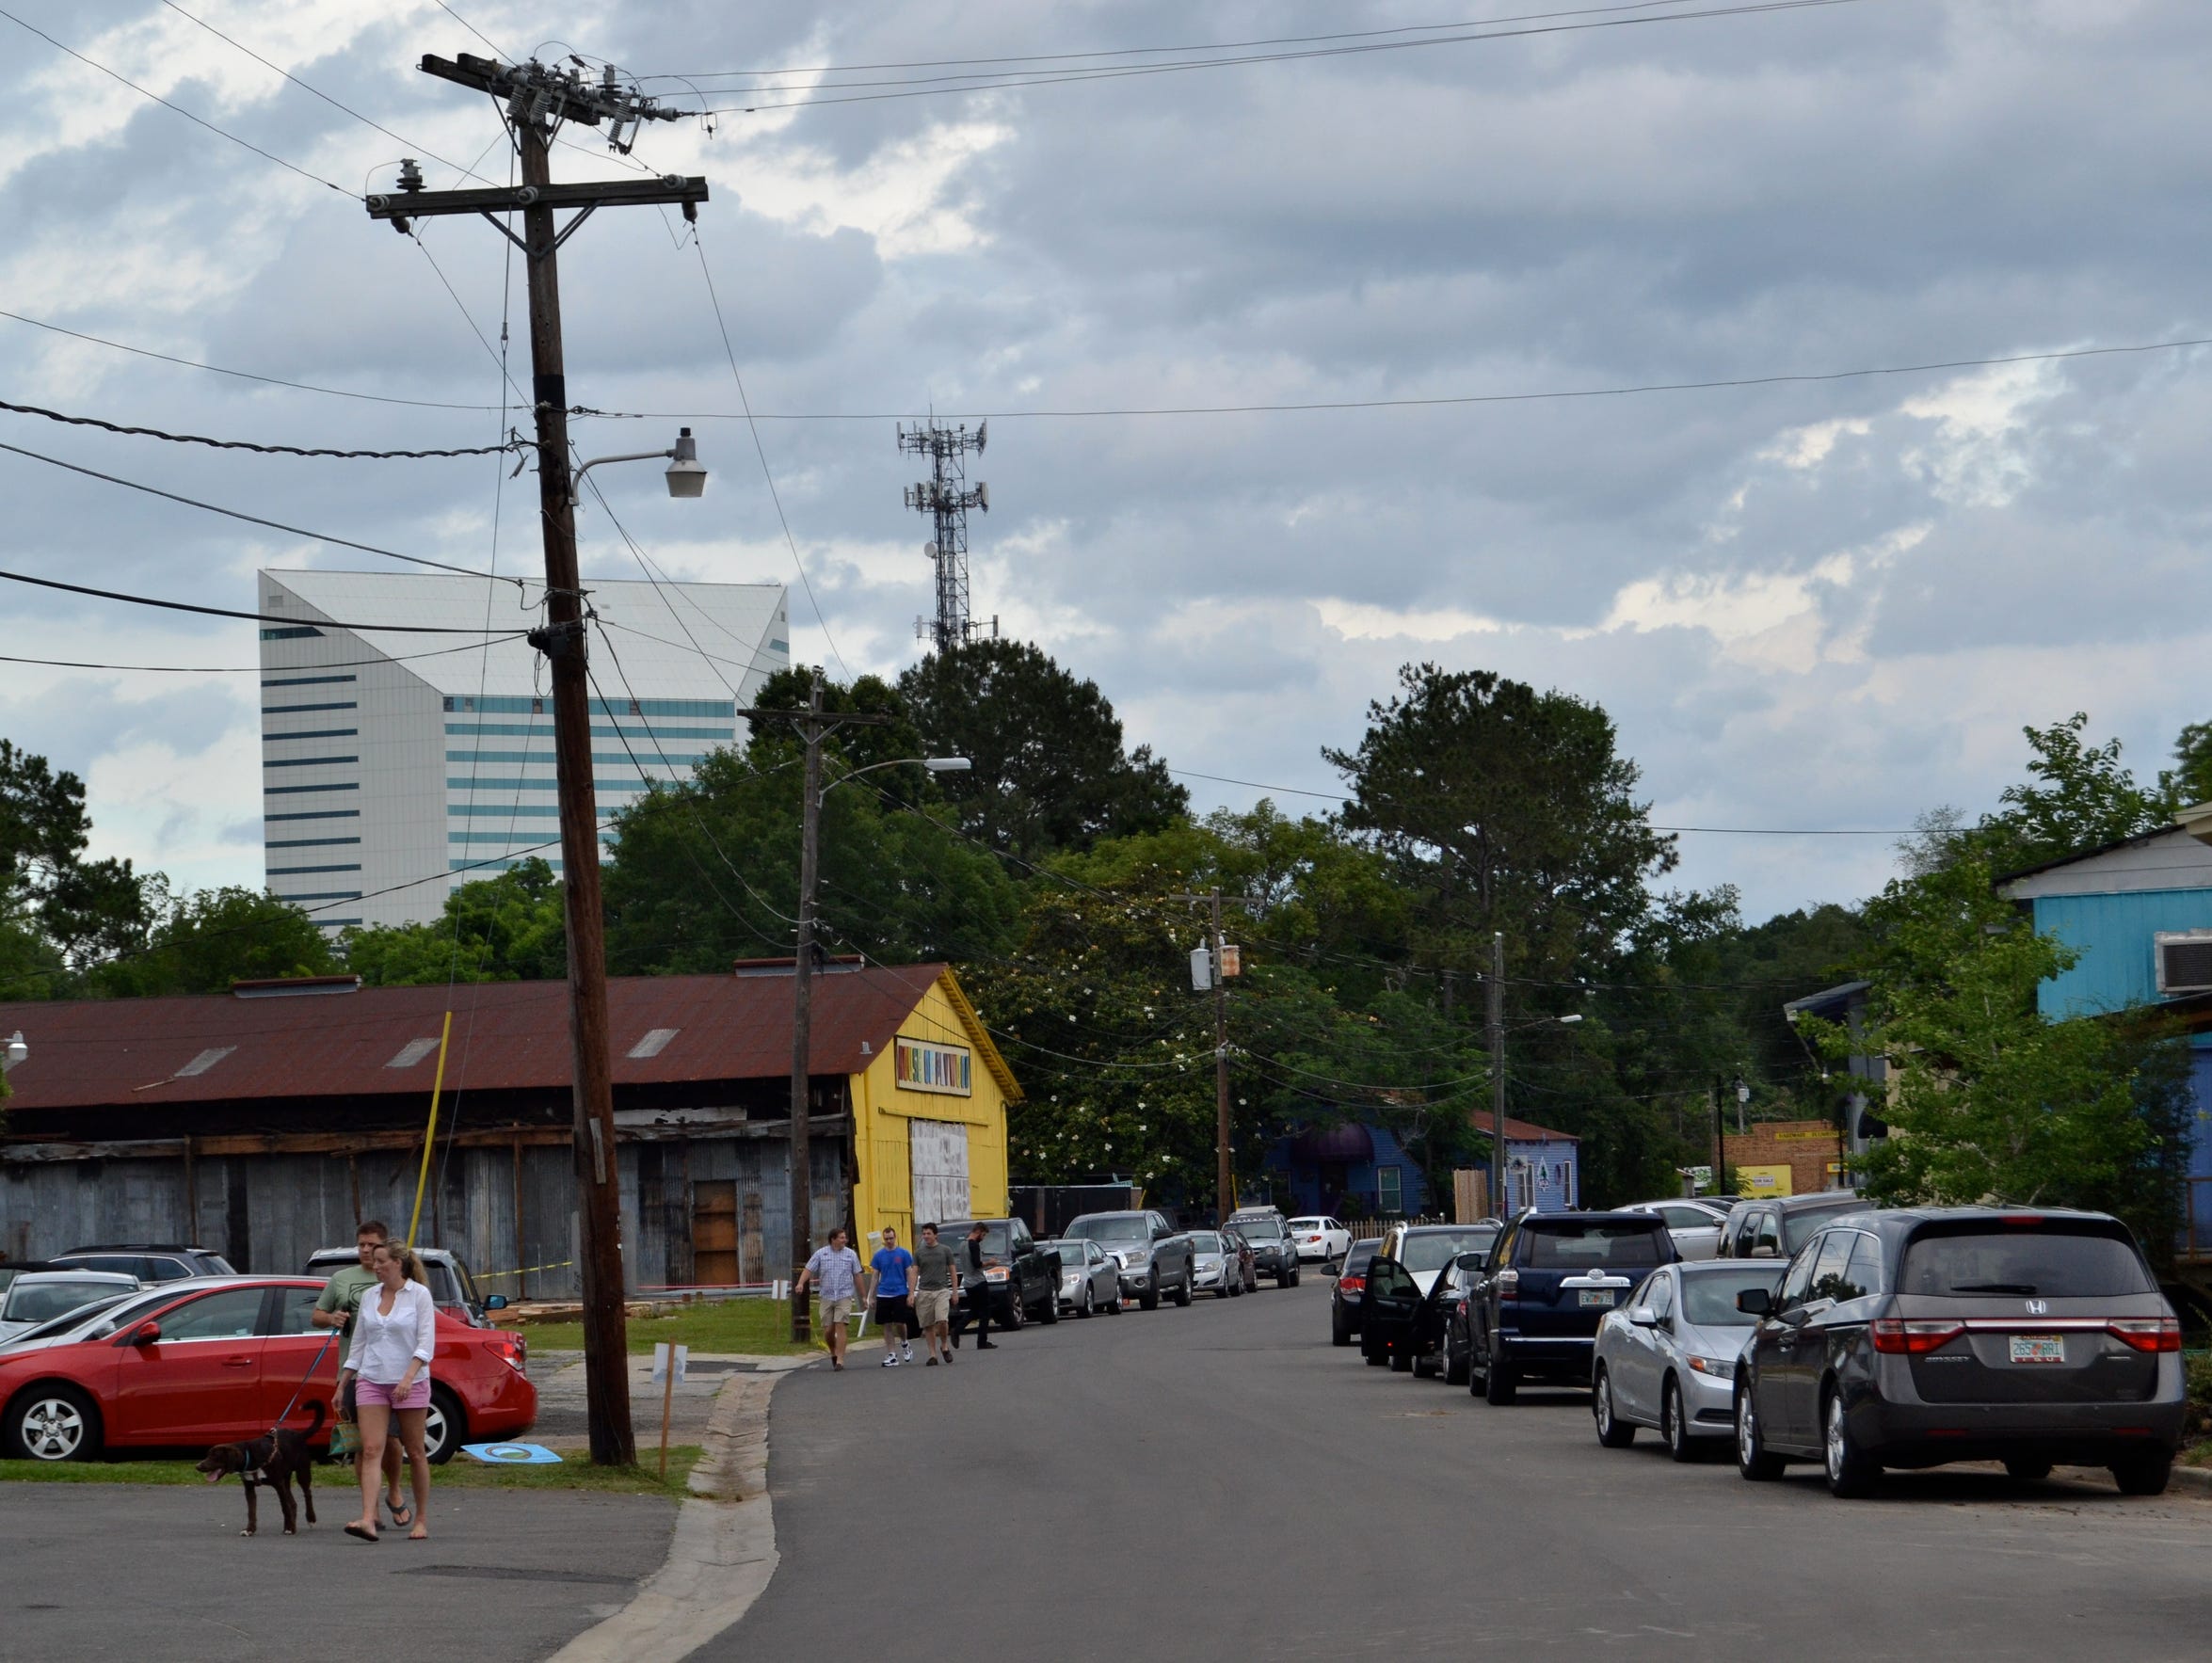 Cars line the streets of Railroad Square for Proof